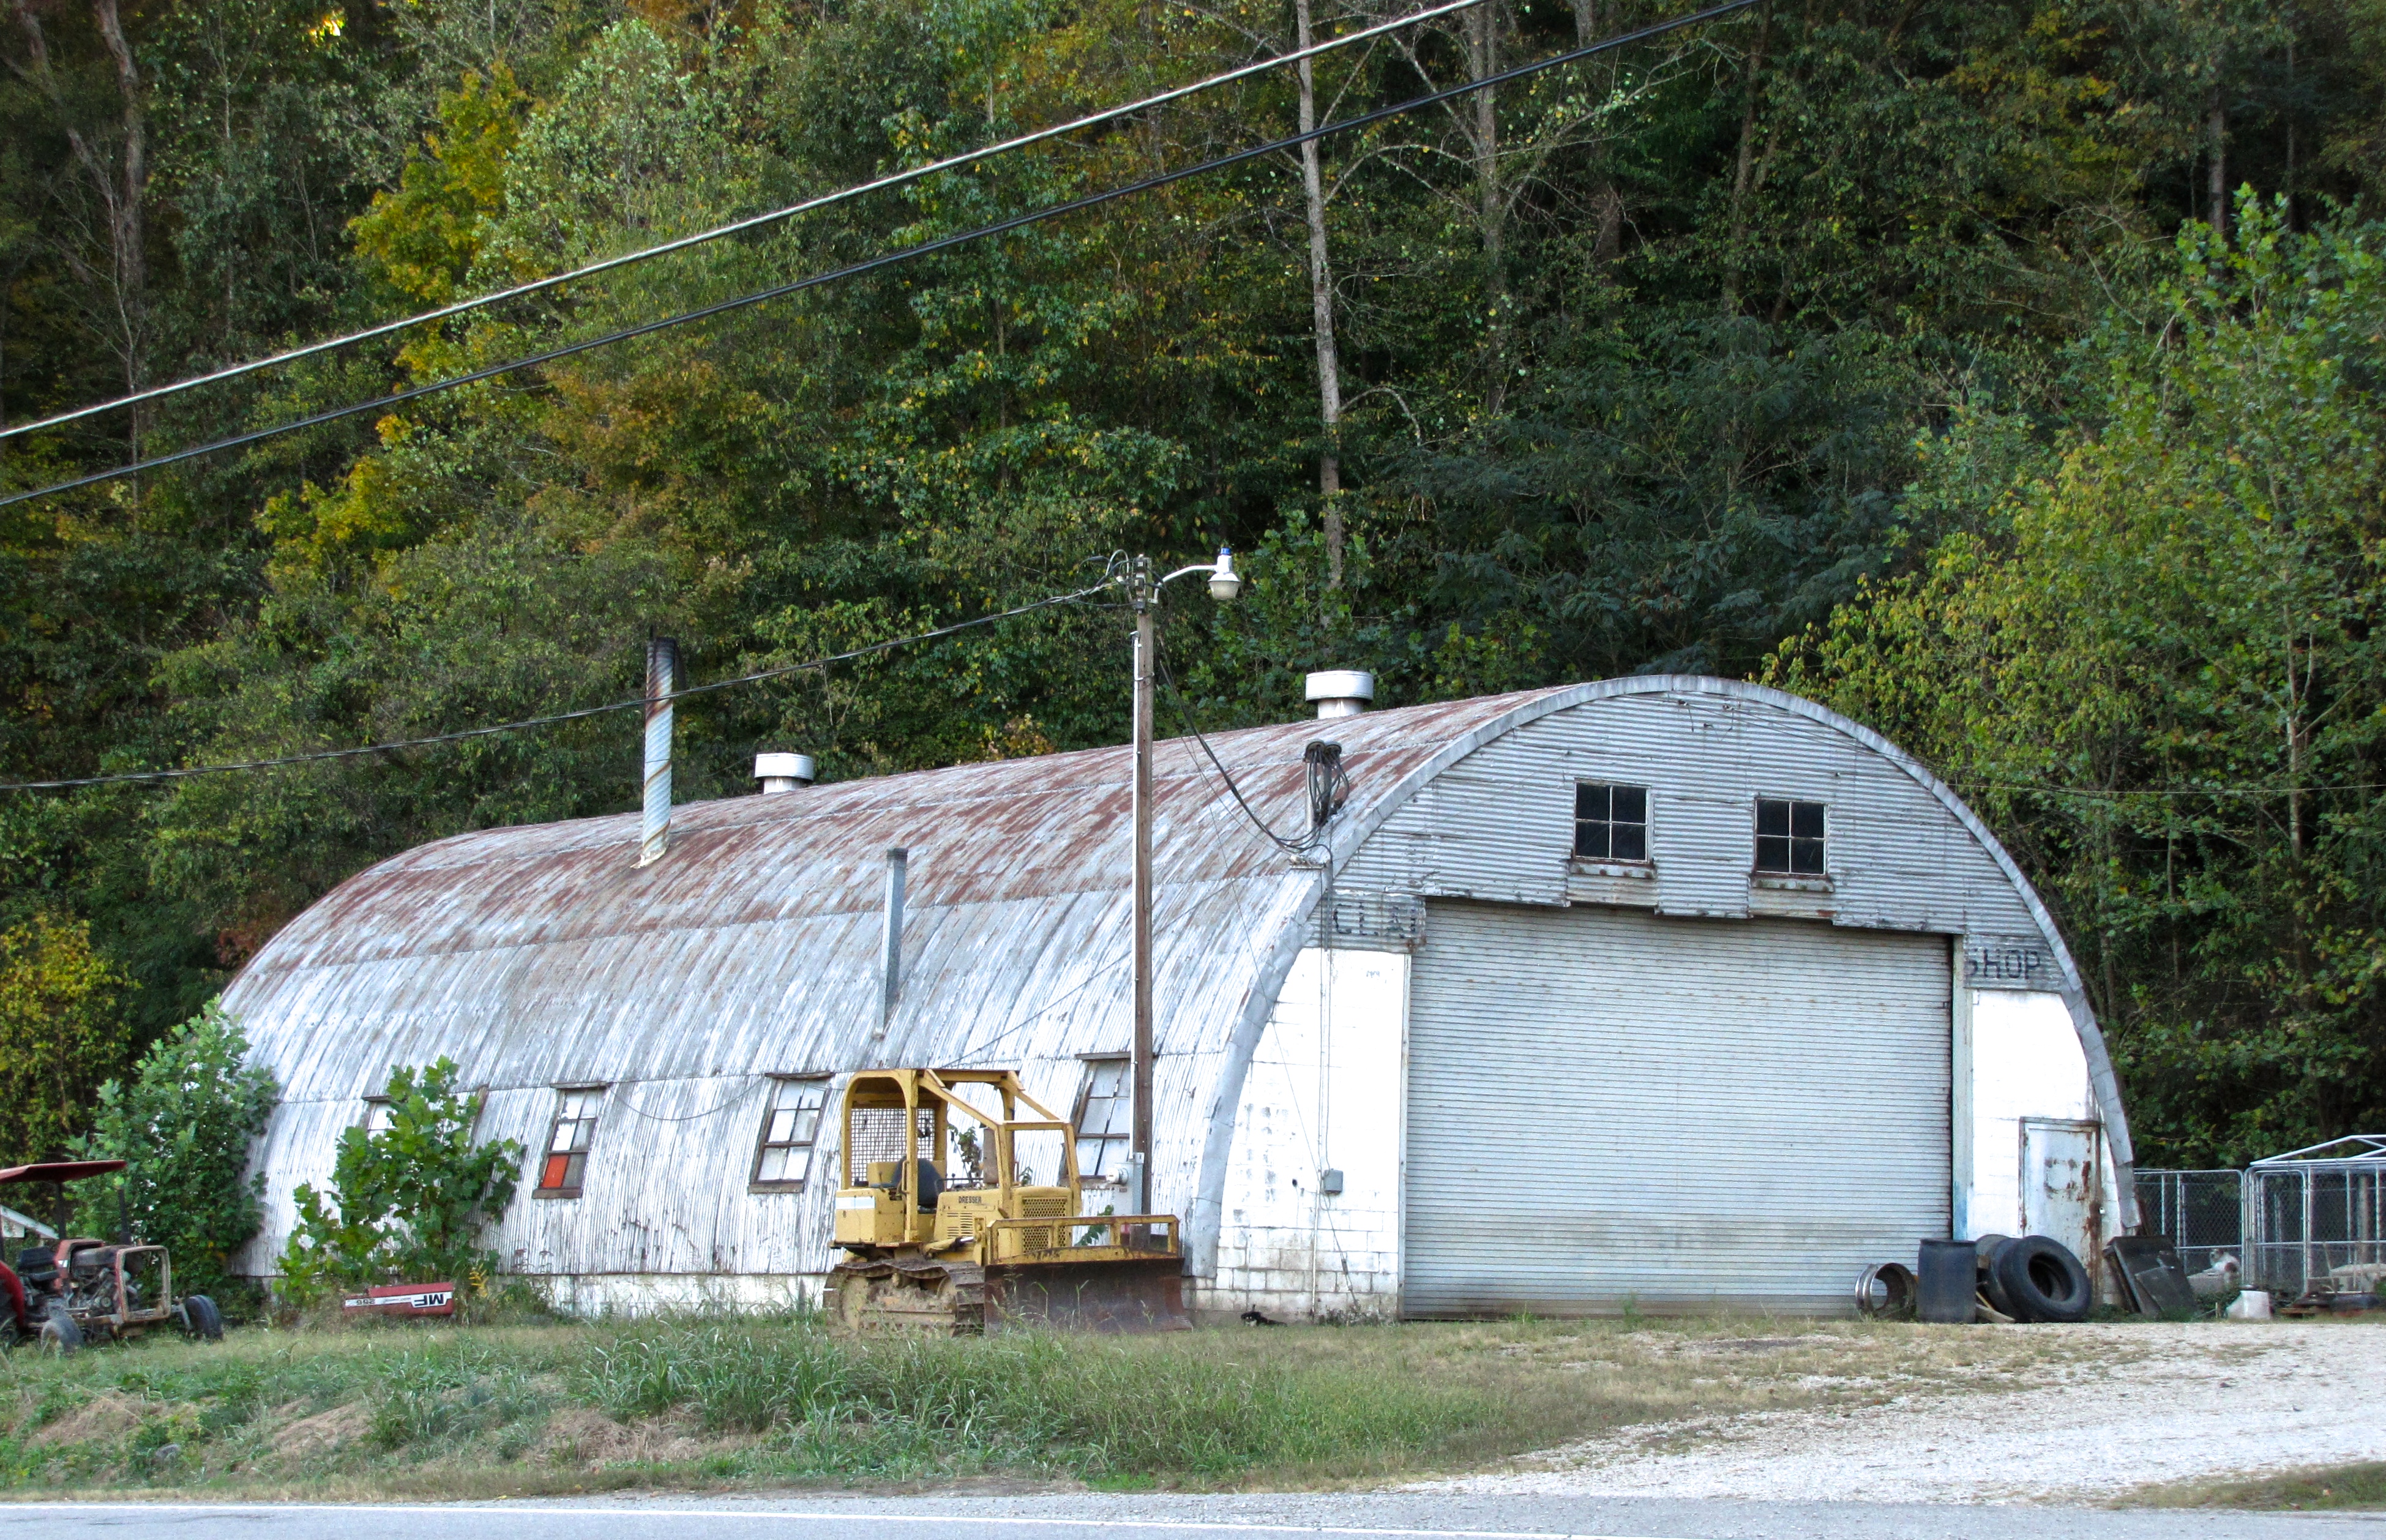 quonset hut in South Weymouth, MA